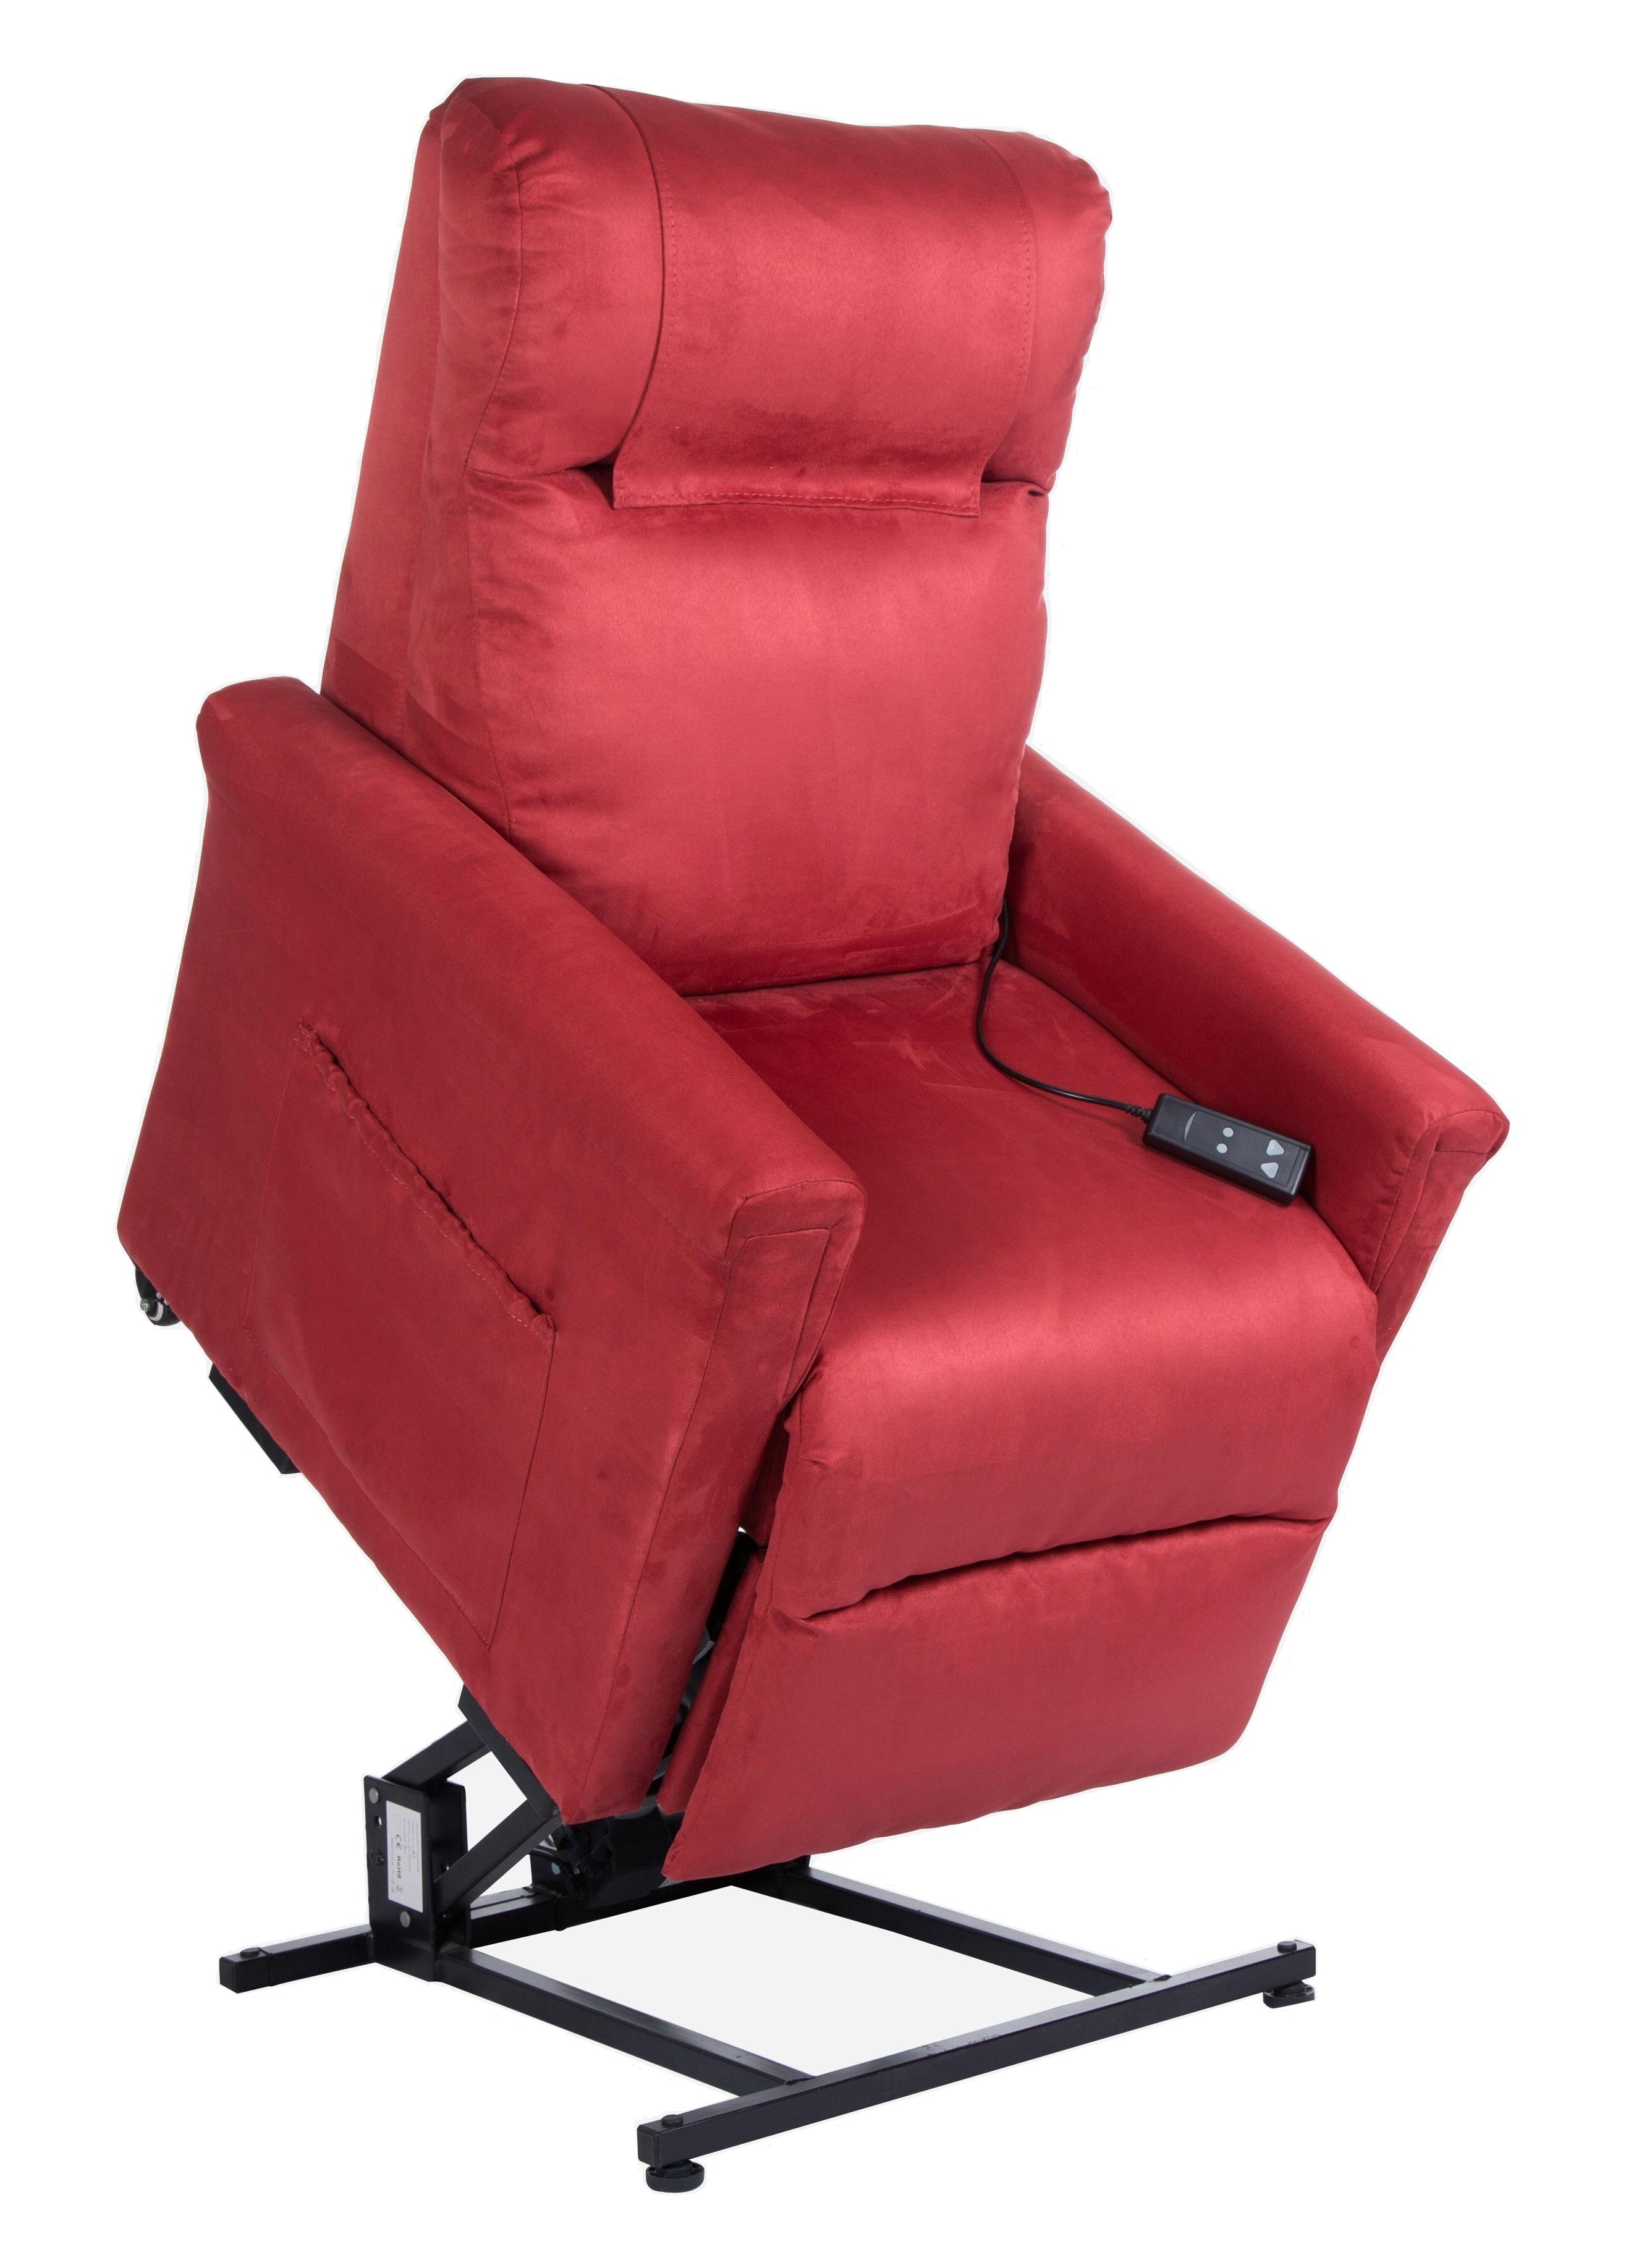 dalila red microfiber up chair